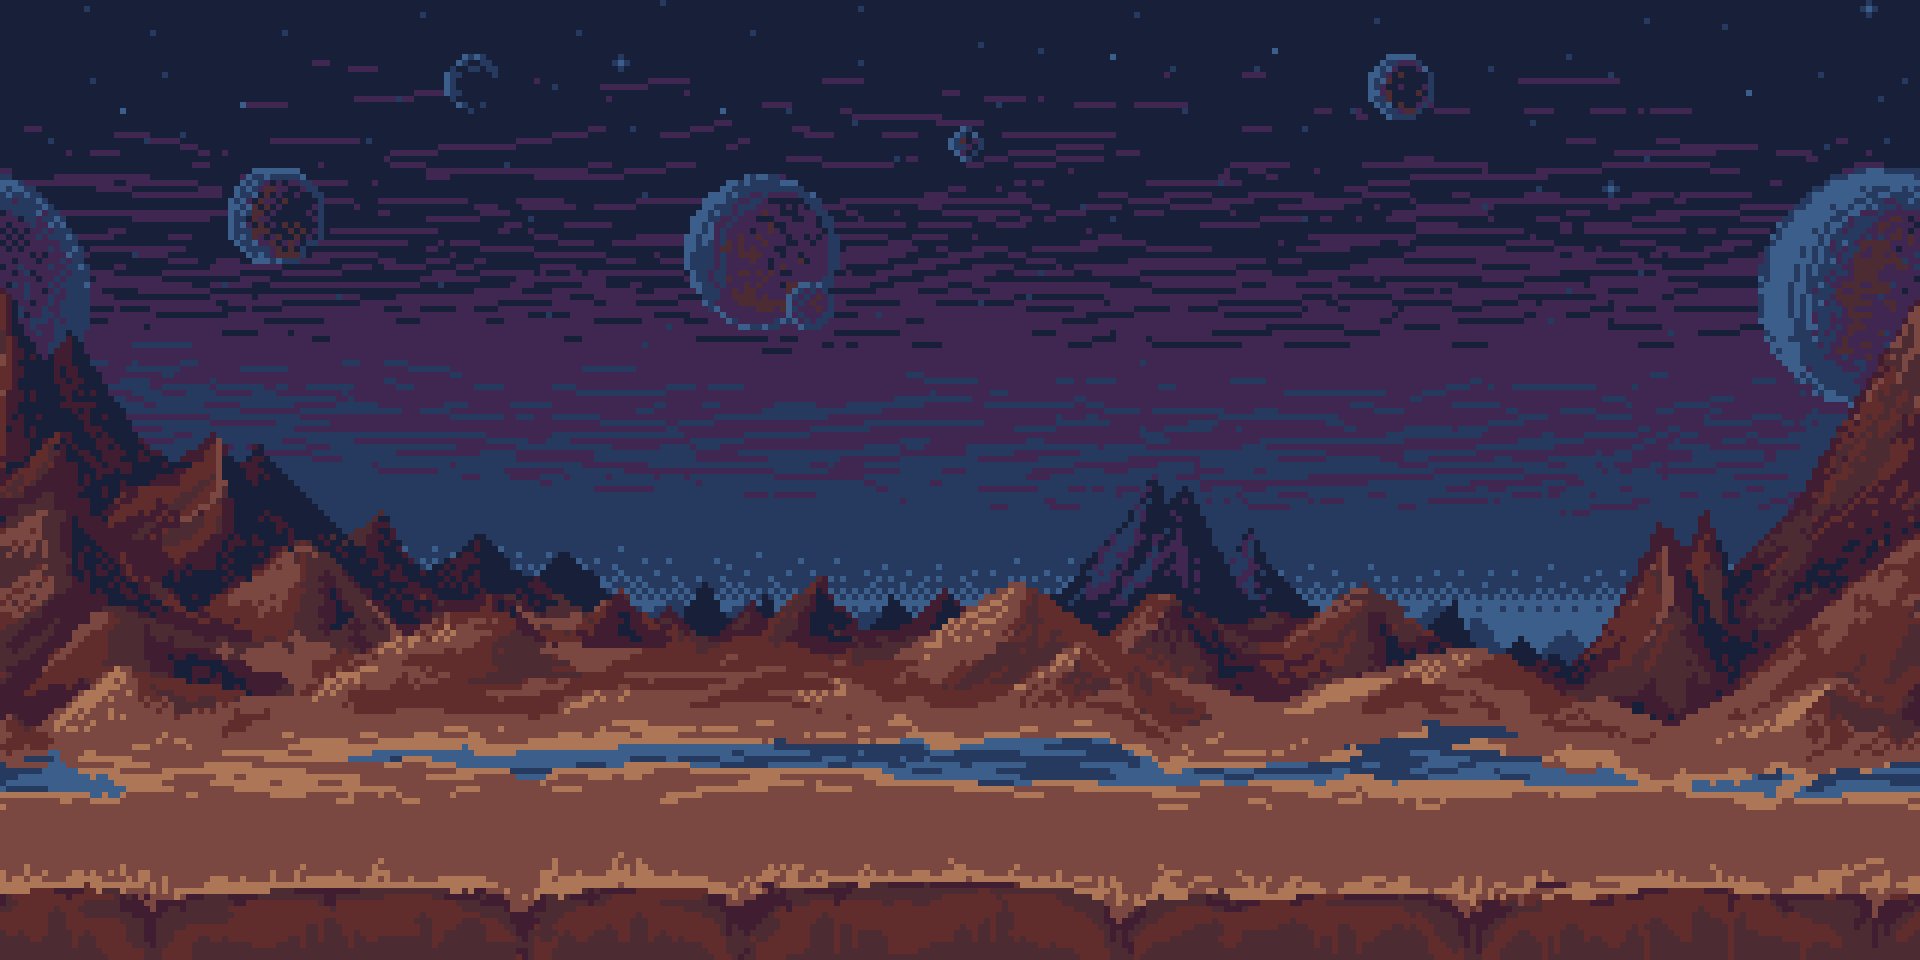 Parallax Terrestrial Planet by kayillustrations